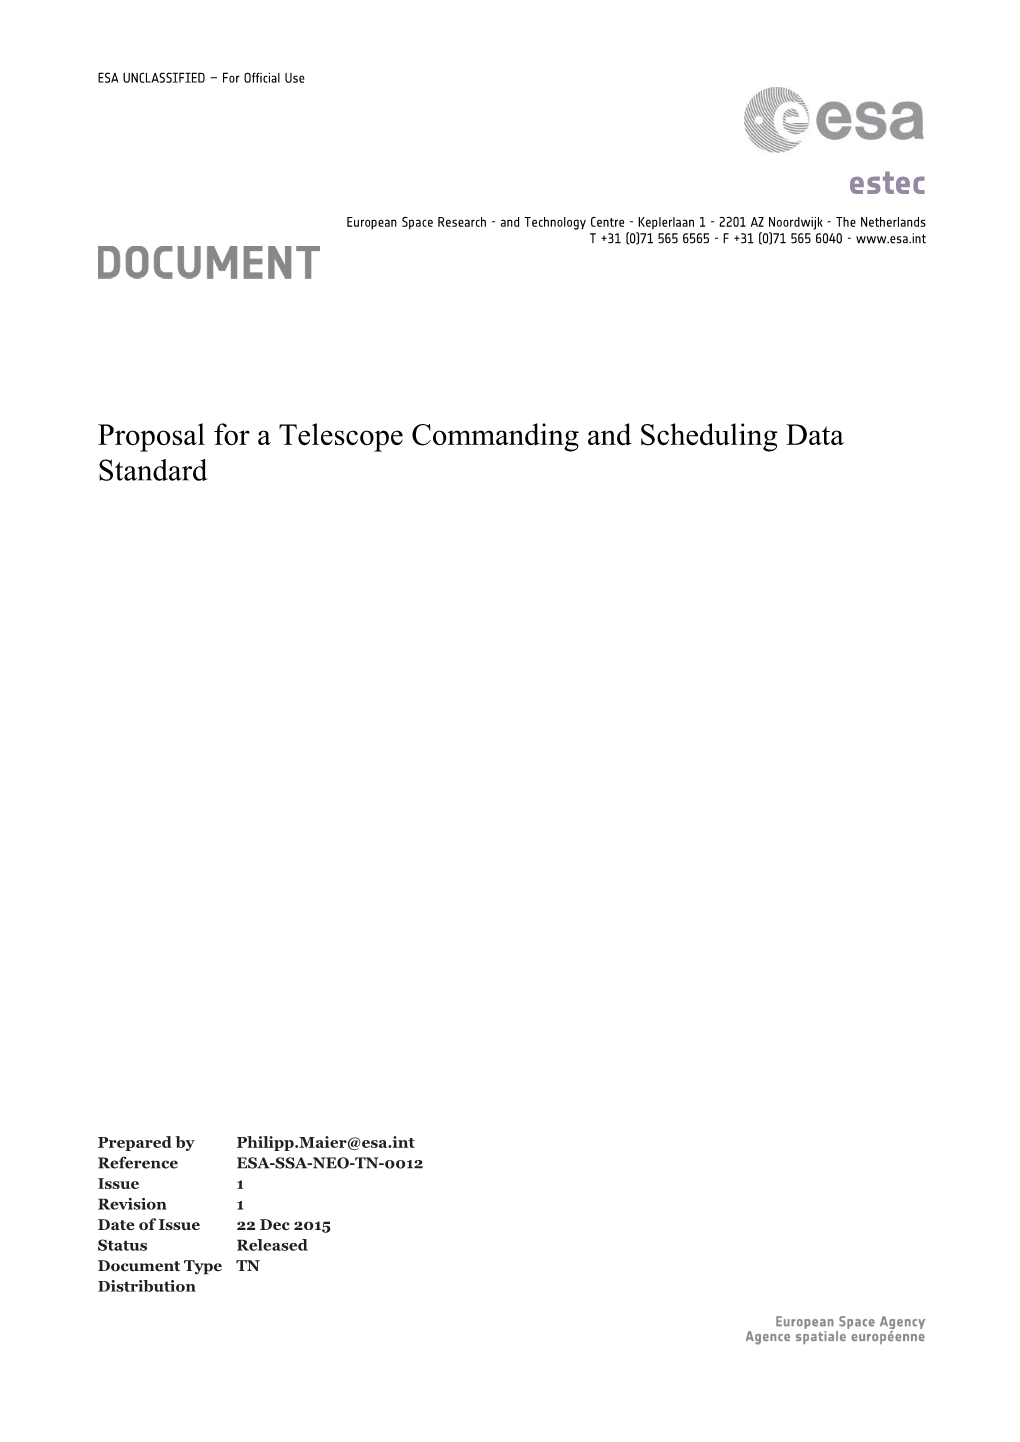 Proposal for a Telescope Commanding and Scheduling Data Standard